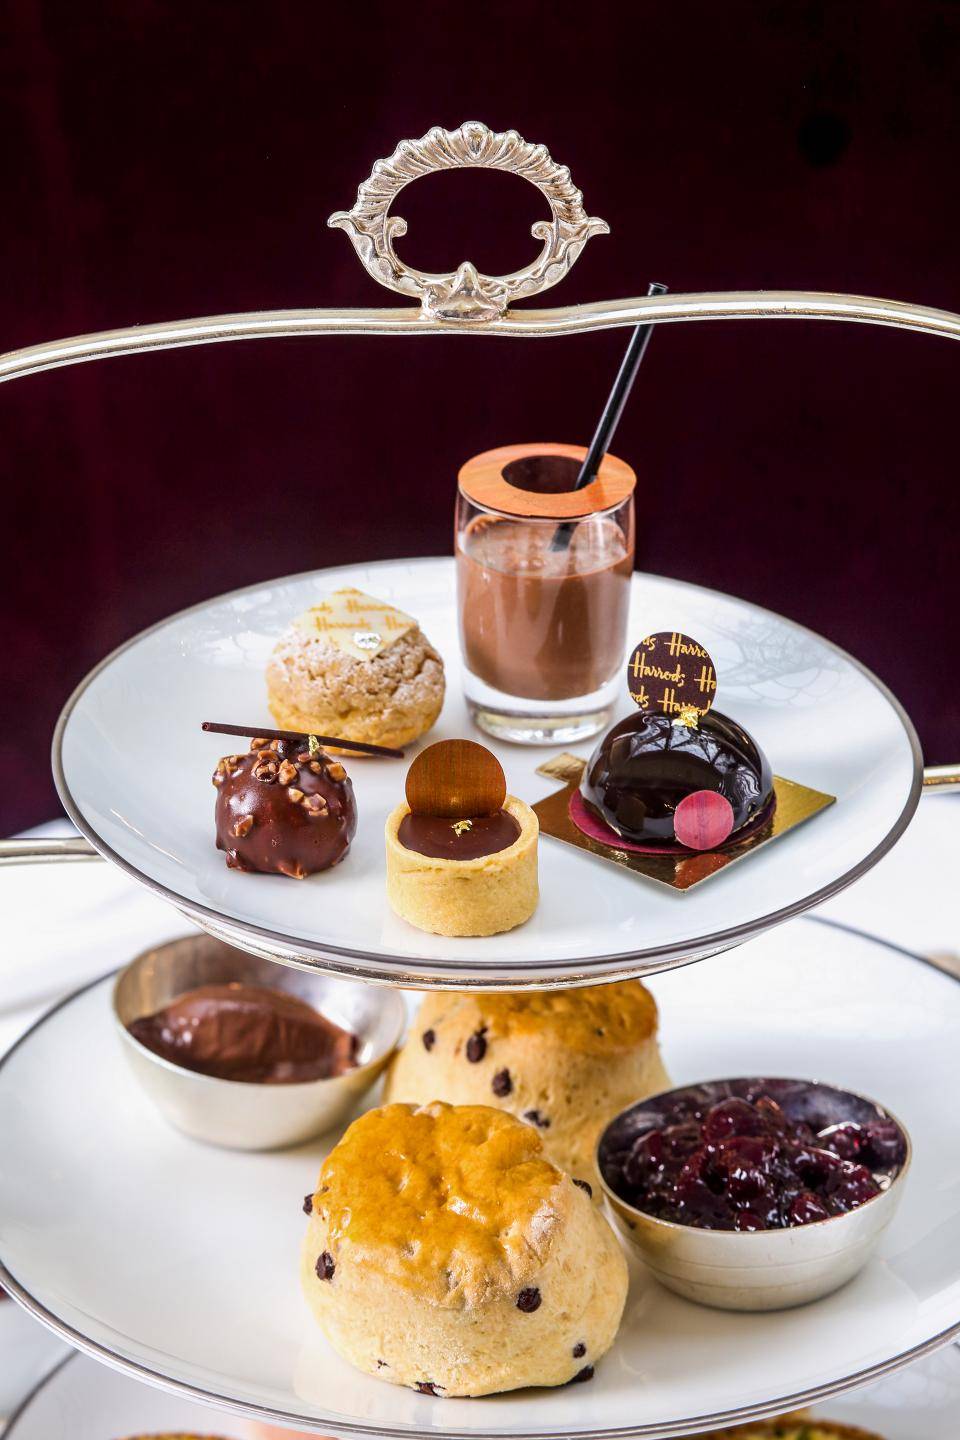 The Praline Ball and Malt Chocolate Drink from the Harrods Chocolate Afternoon tea